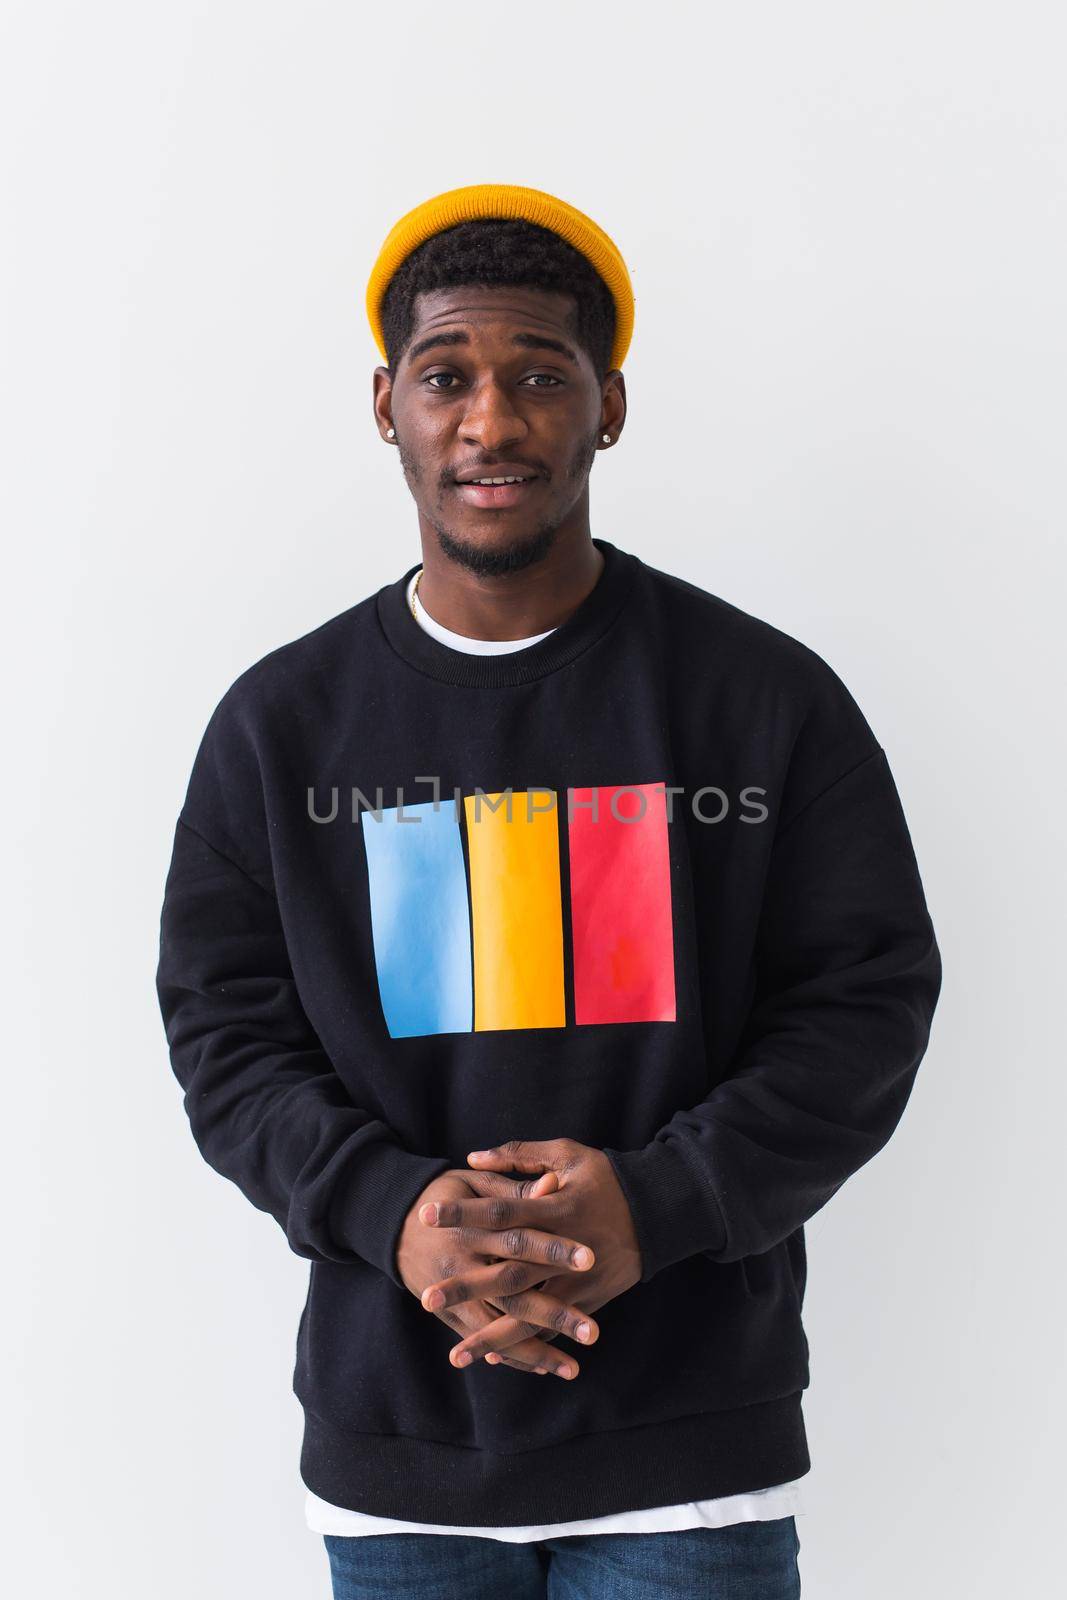 Street fashion concept - Studio shot of young handsome African man wearing sweatshirt against white background. by Satura86